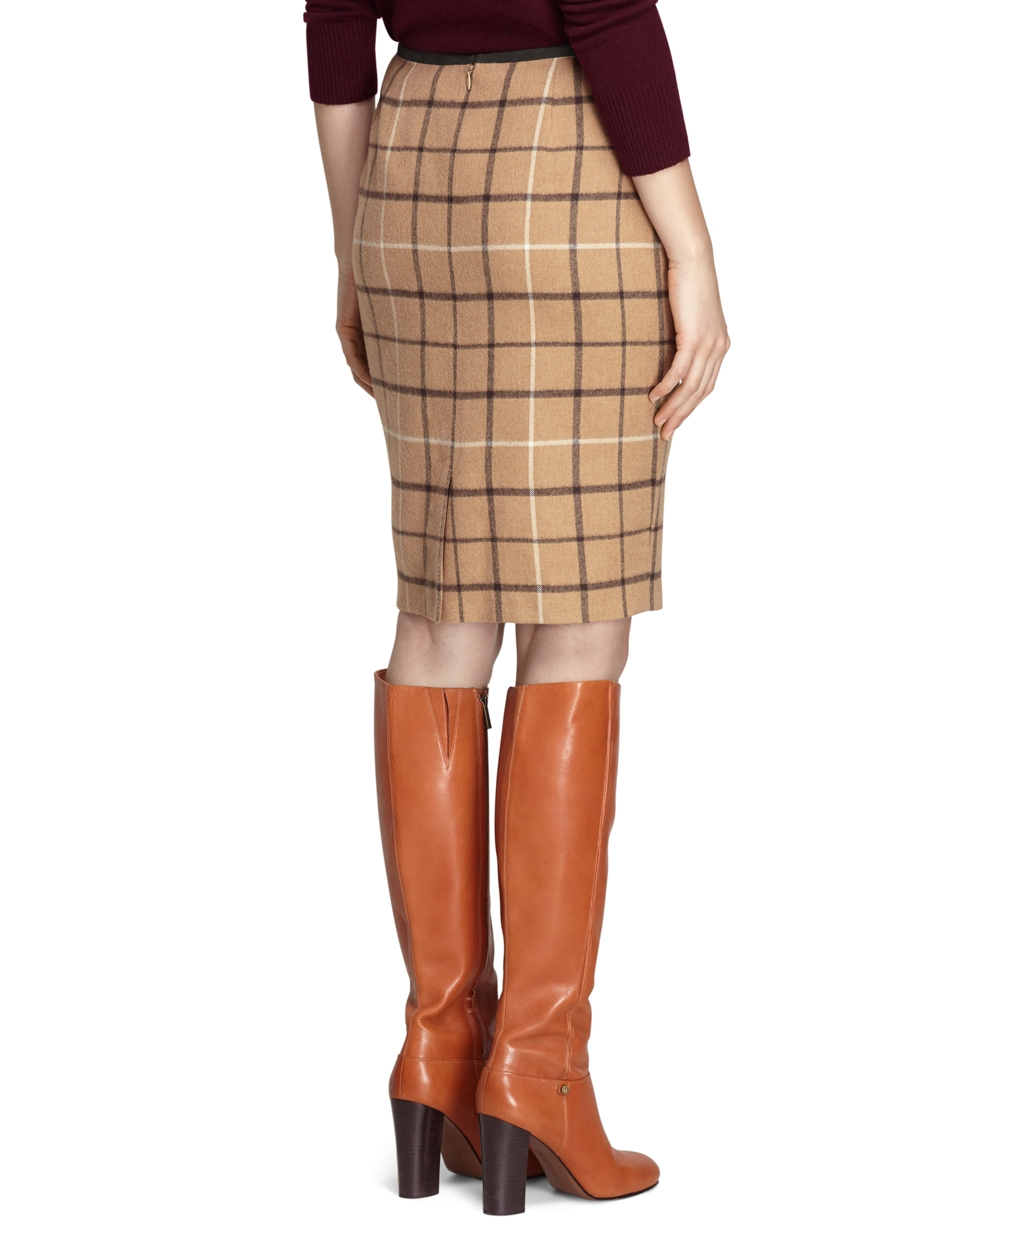 Lyst - Brooks Brothers Camel Hair Windowpane Pencil Skirt in Natural